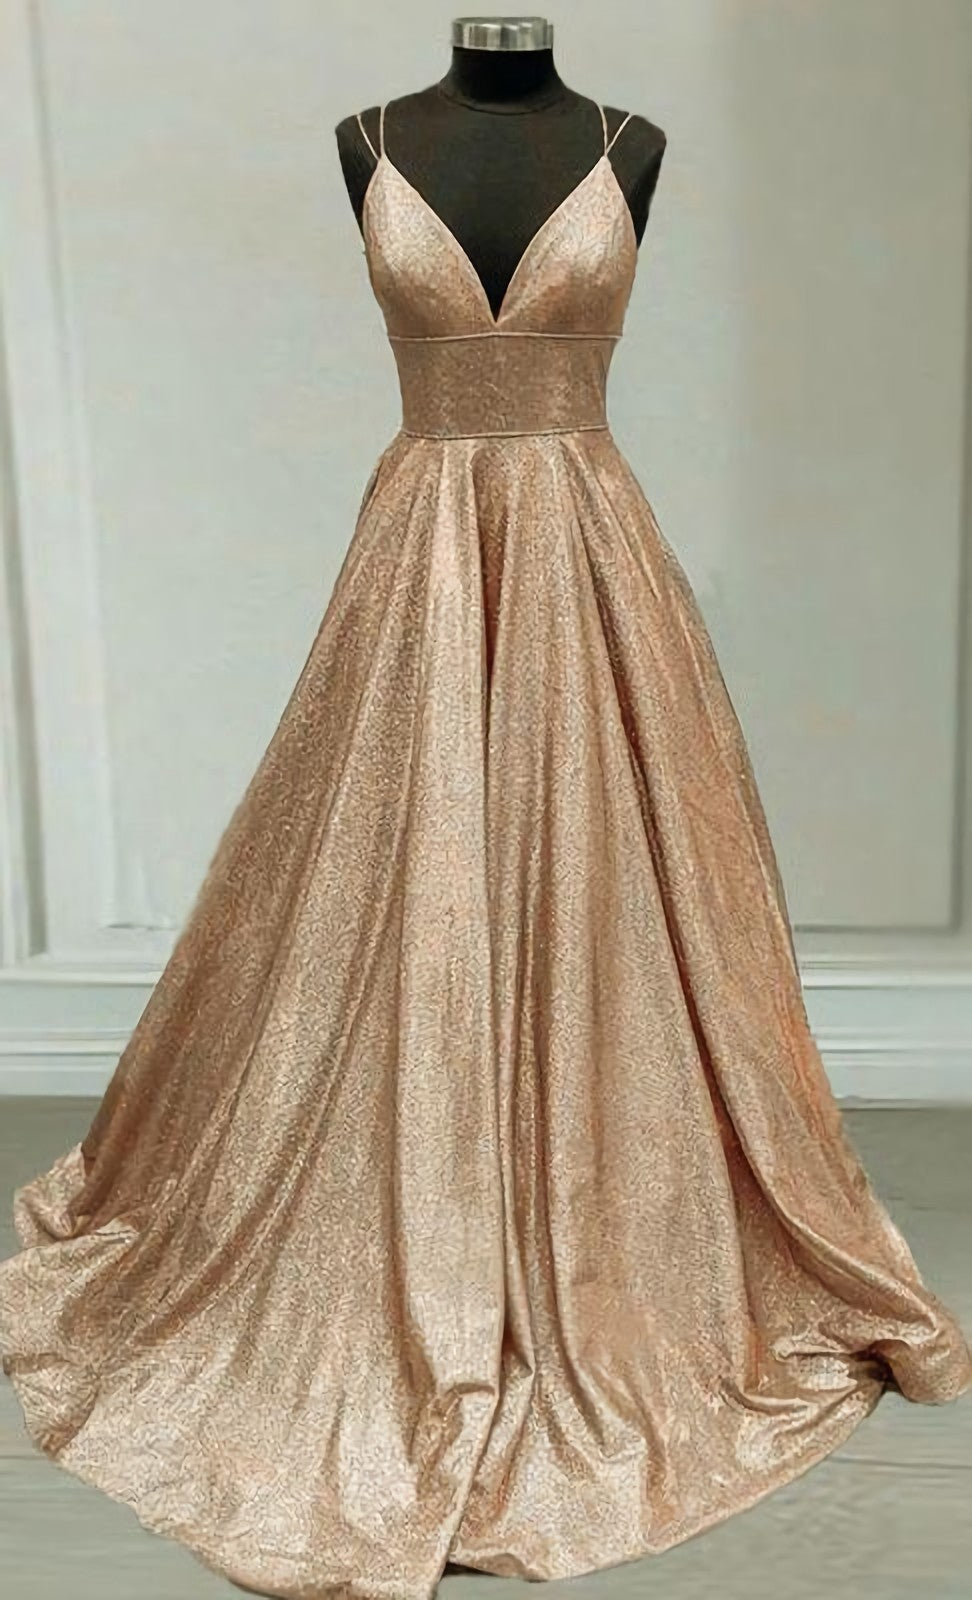 Party Dress Night Out, Sparkly Prom Dresses, Champagne Gold Ball Gown V Neck With Multi Straps